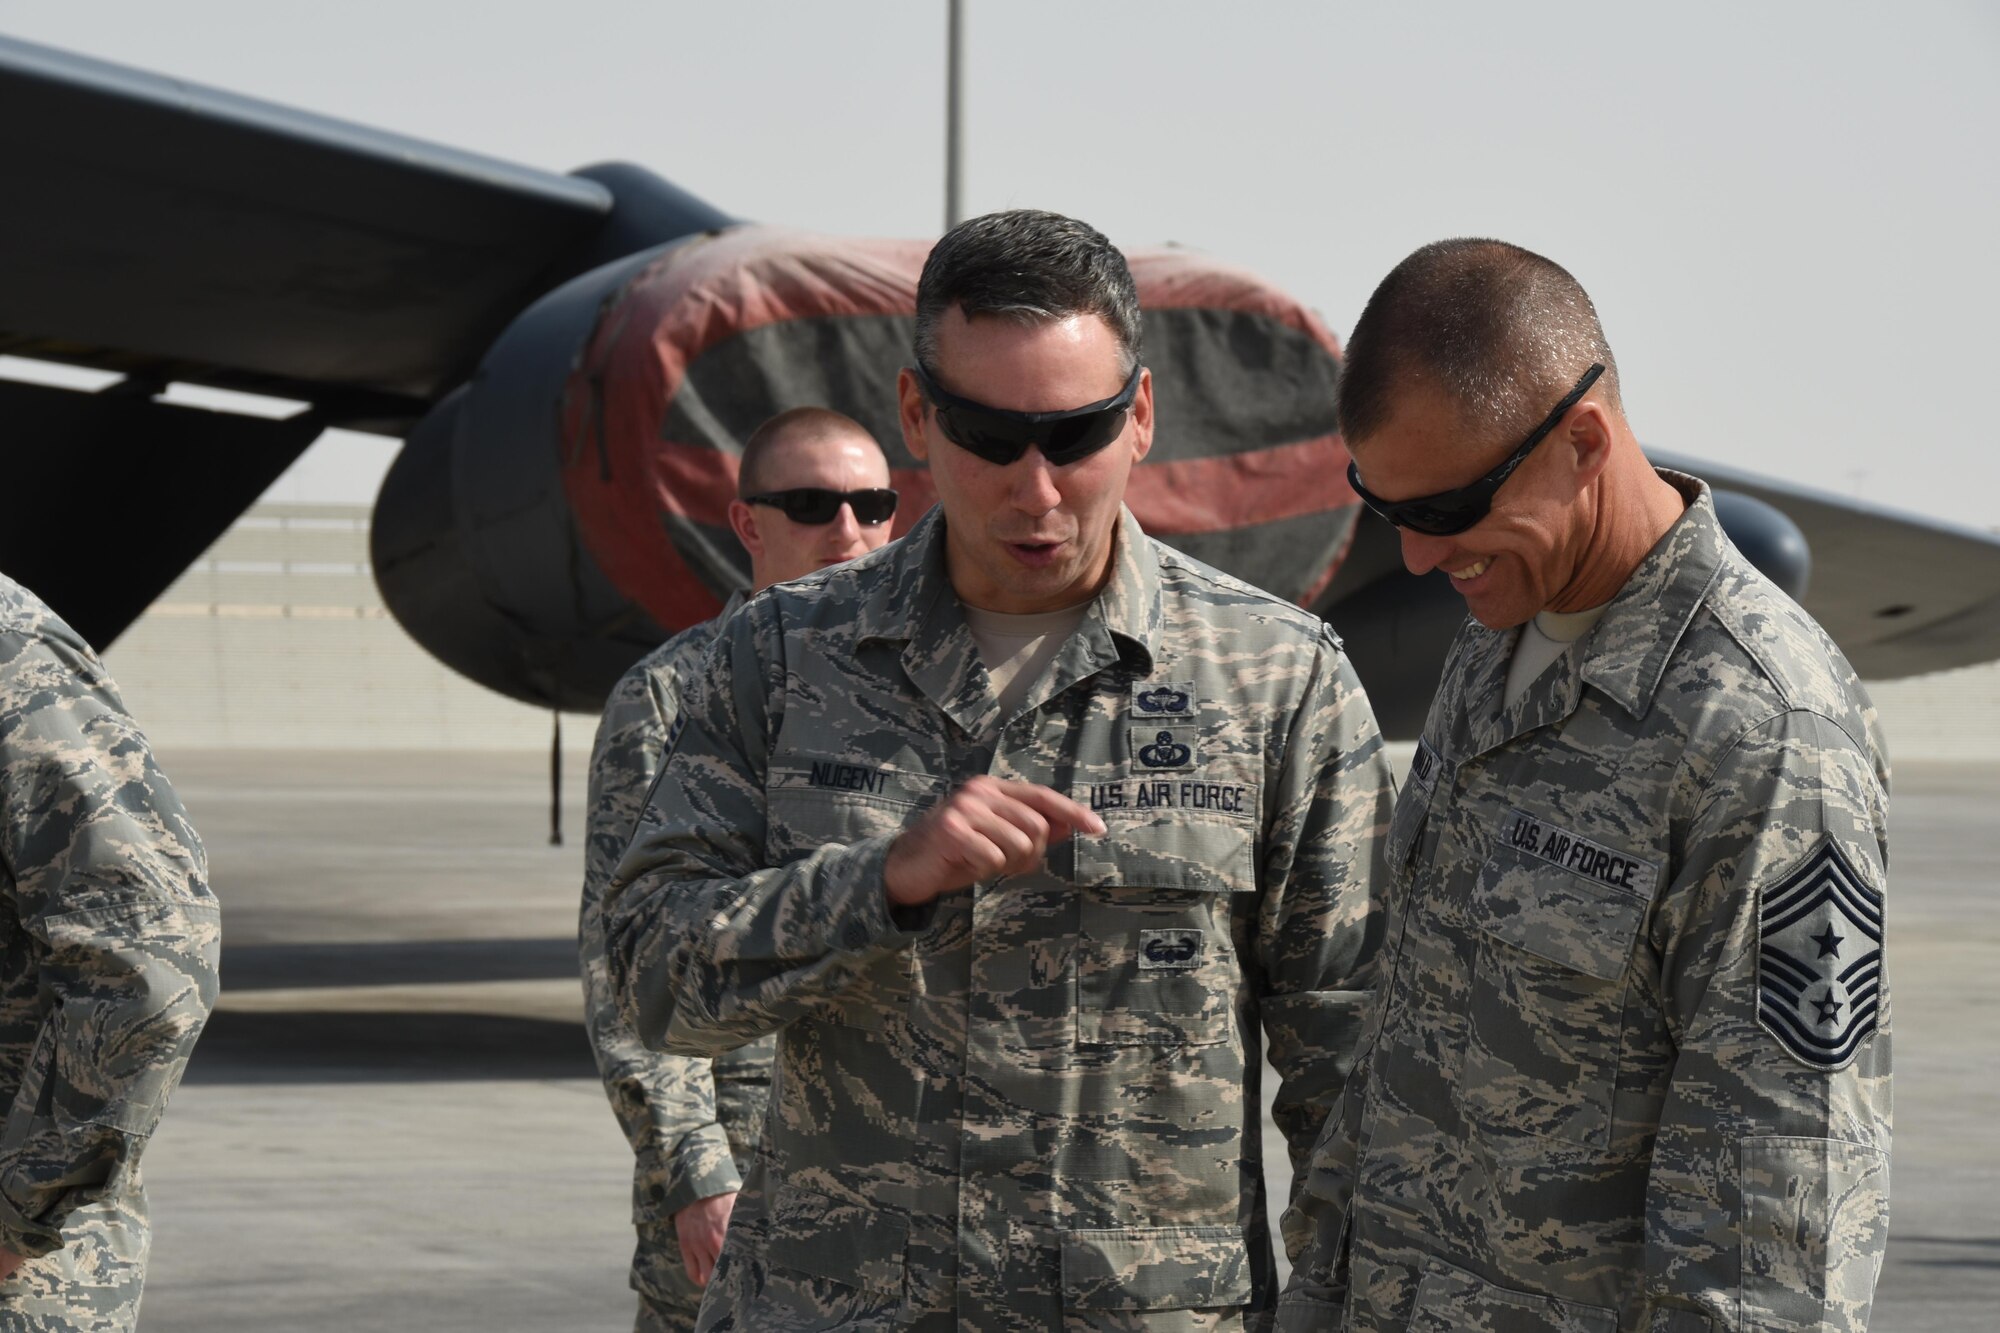 Chief Master Sgt. Steve McDonald, Air Combat Command command chief master sergeant, reunites with a wingman, Chief Master Sgt. Matthew Nugent, superintendent of the 379th Expeditionary Operations Group, Nov. 23, 2016, during a tour of the 379th Air Expeditionary Wing, at Al Udeid Air Base, Qatar. (U.S. Air Force photo by Senior Airman Cynthia A. Innocenti)